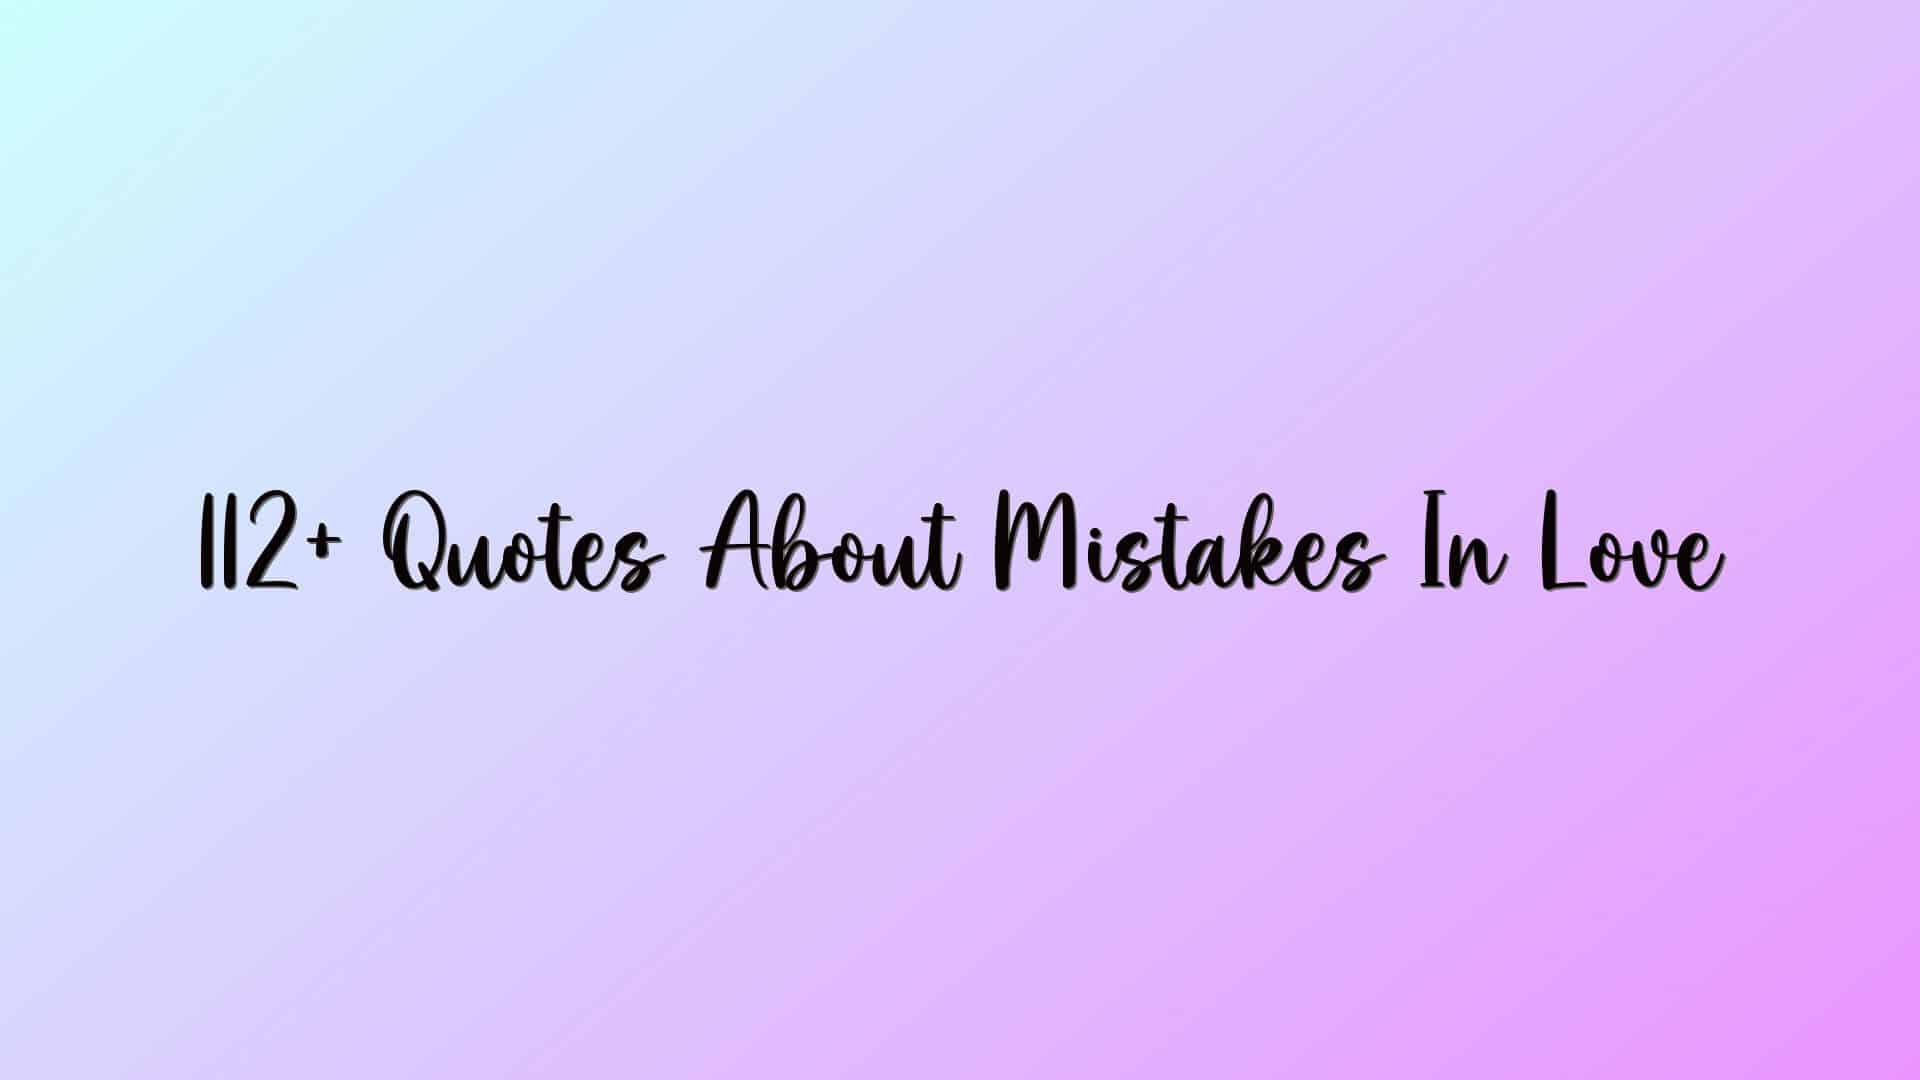 112+ Quotes About Mistakes In Love